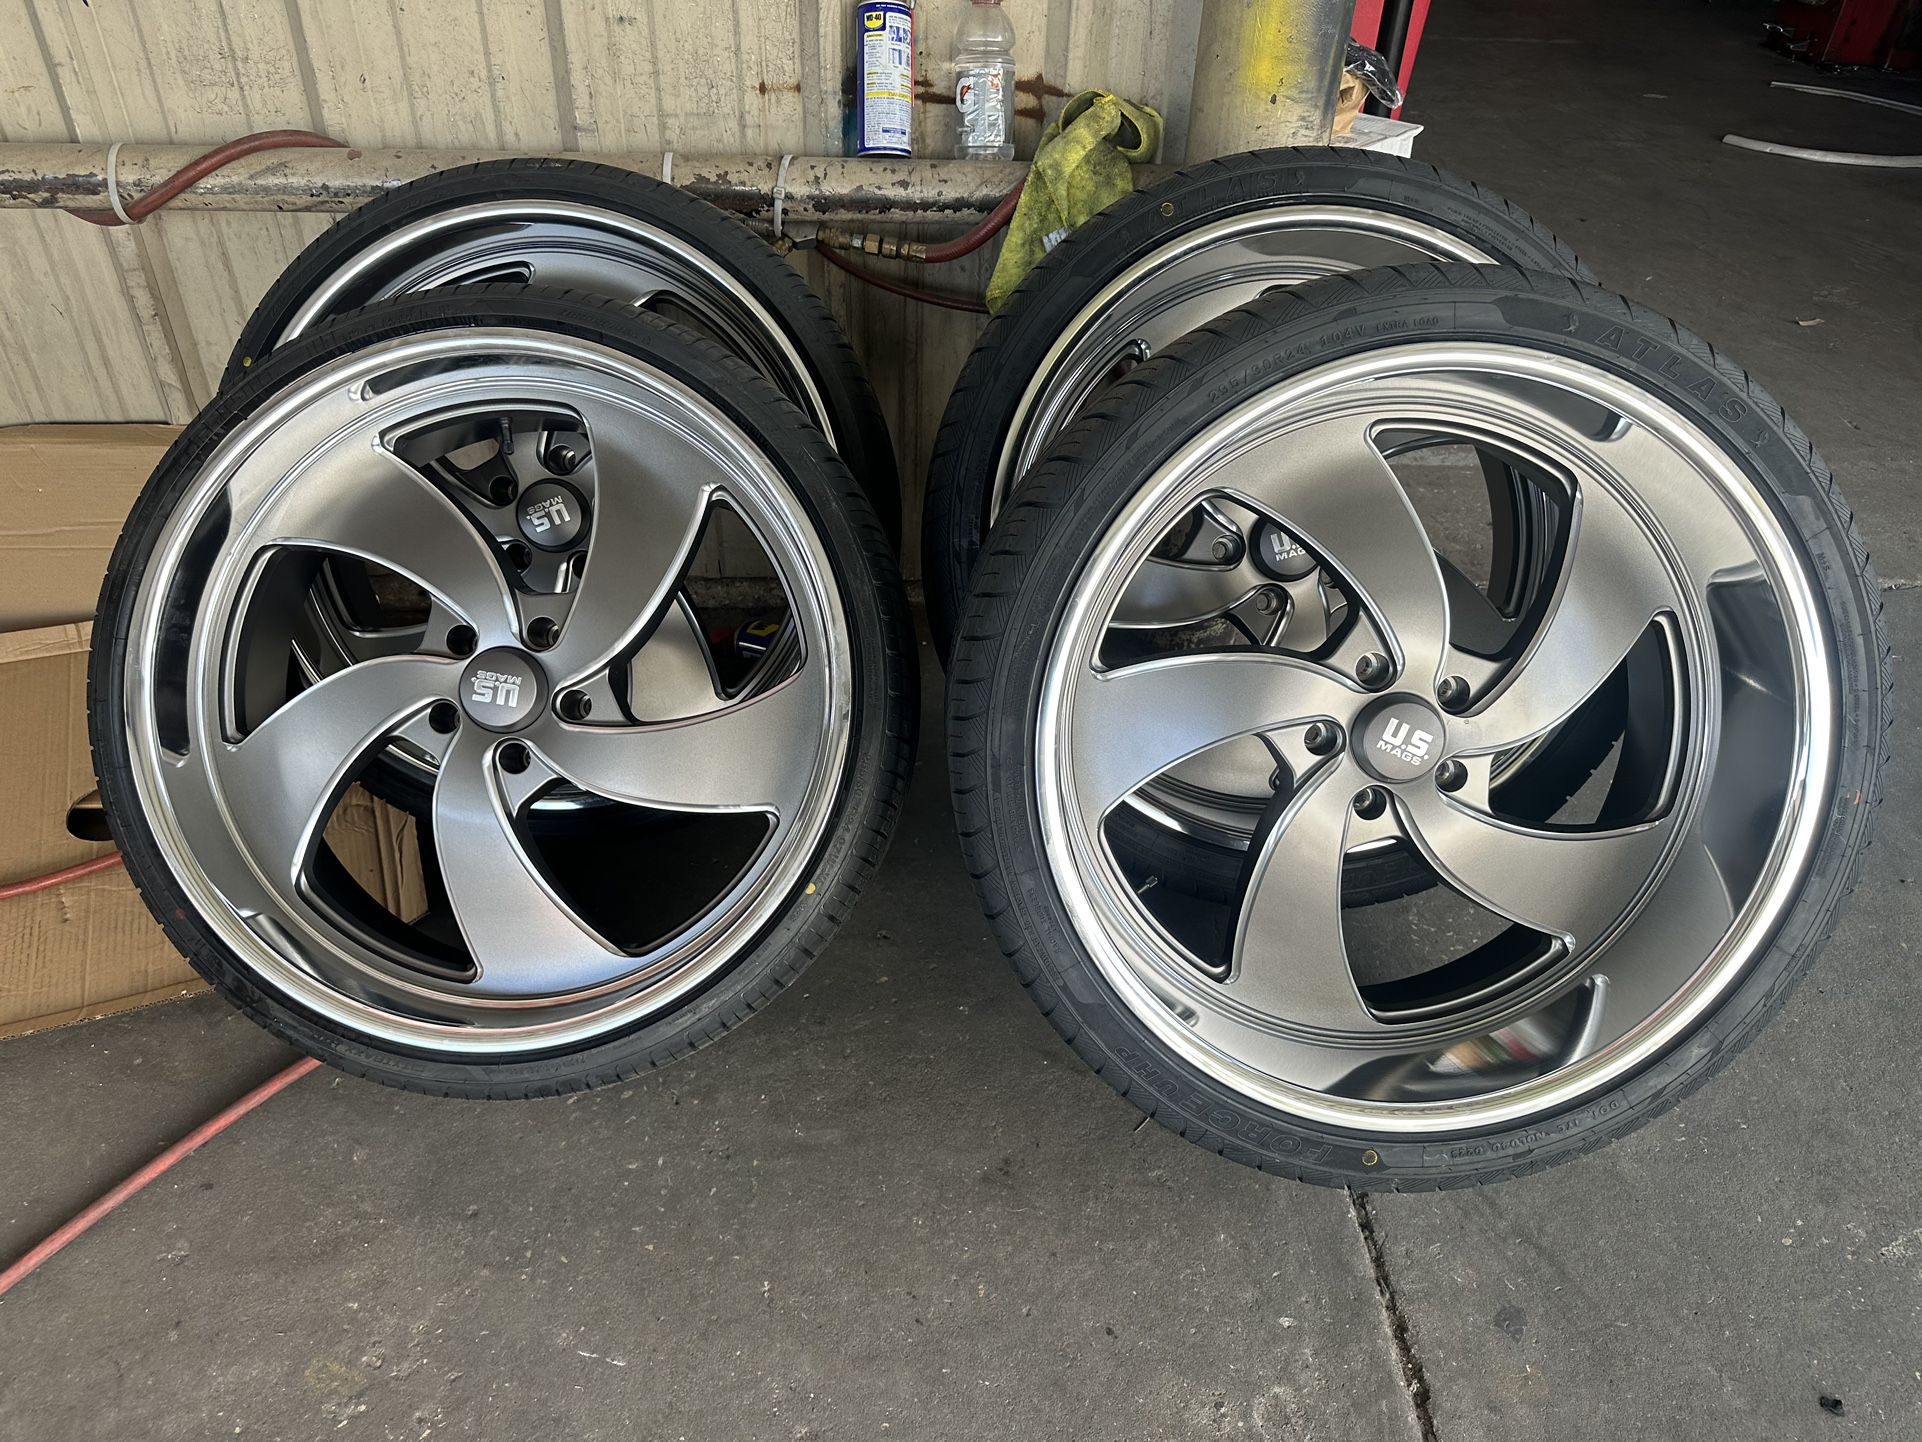 22” Staggered Wheels Us Mag We Offer 120 Days Payment Option